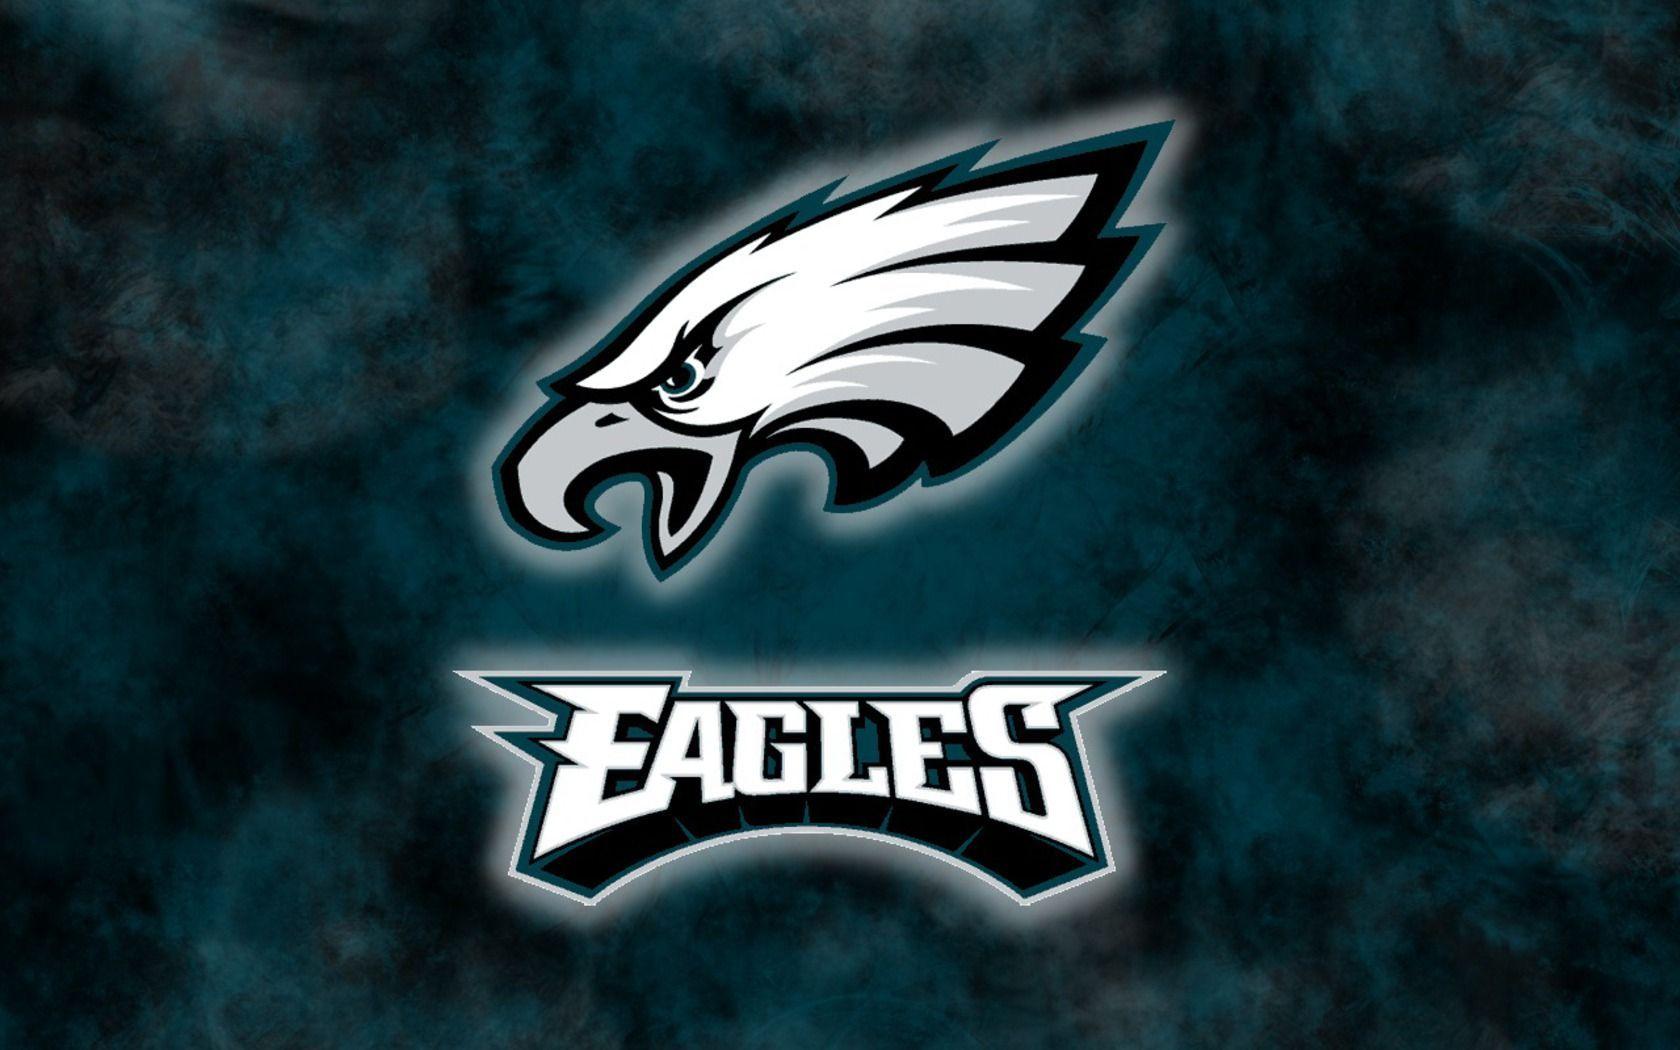 Who Won Eagles Game Last Night